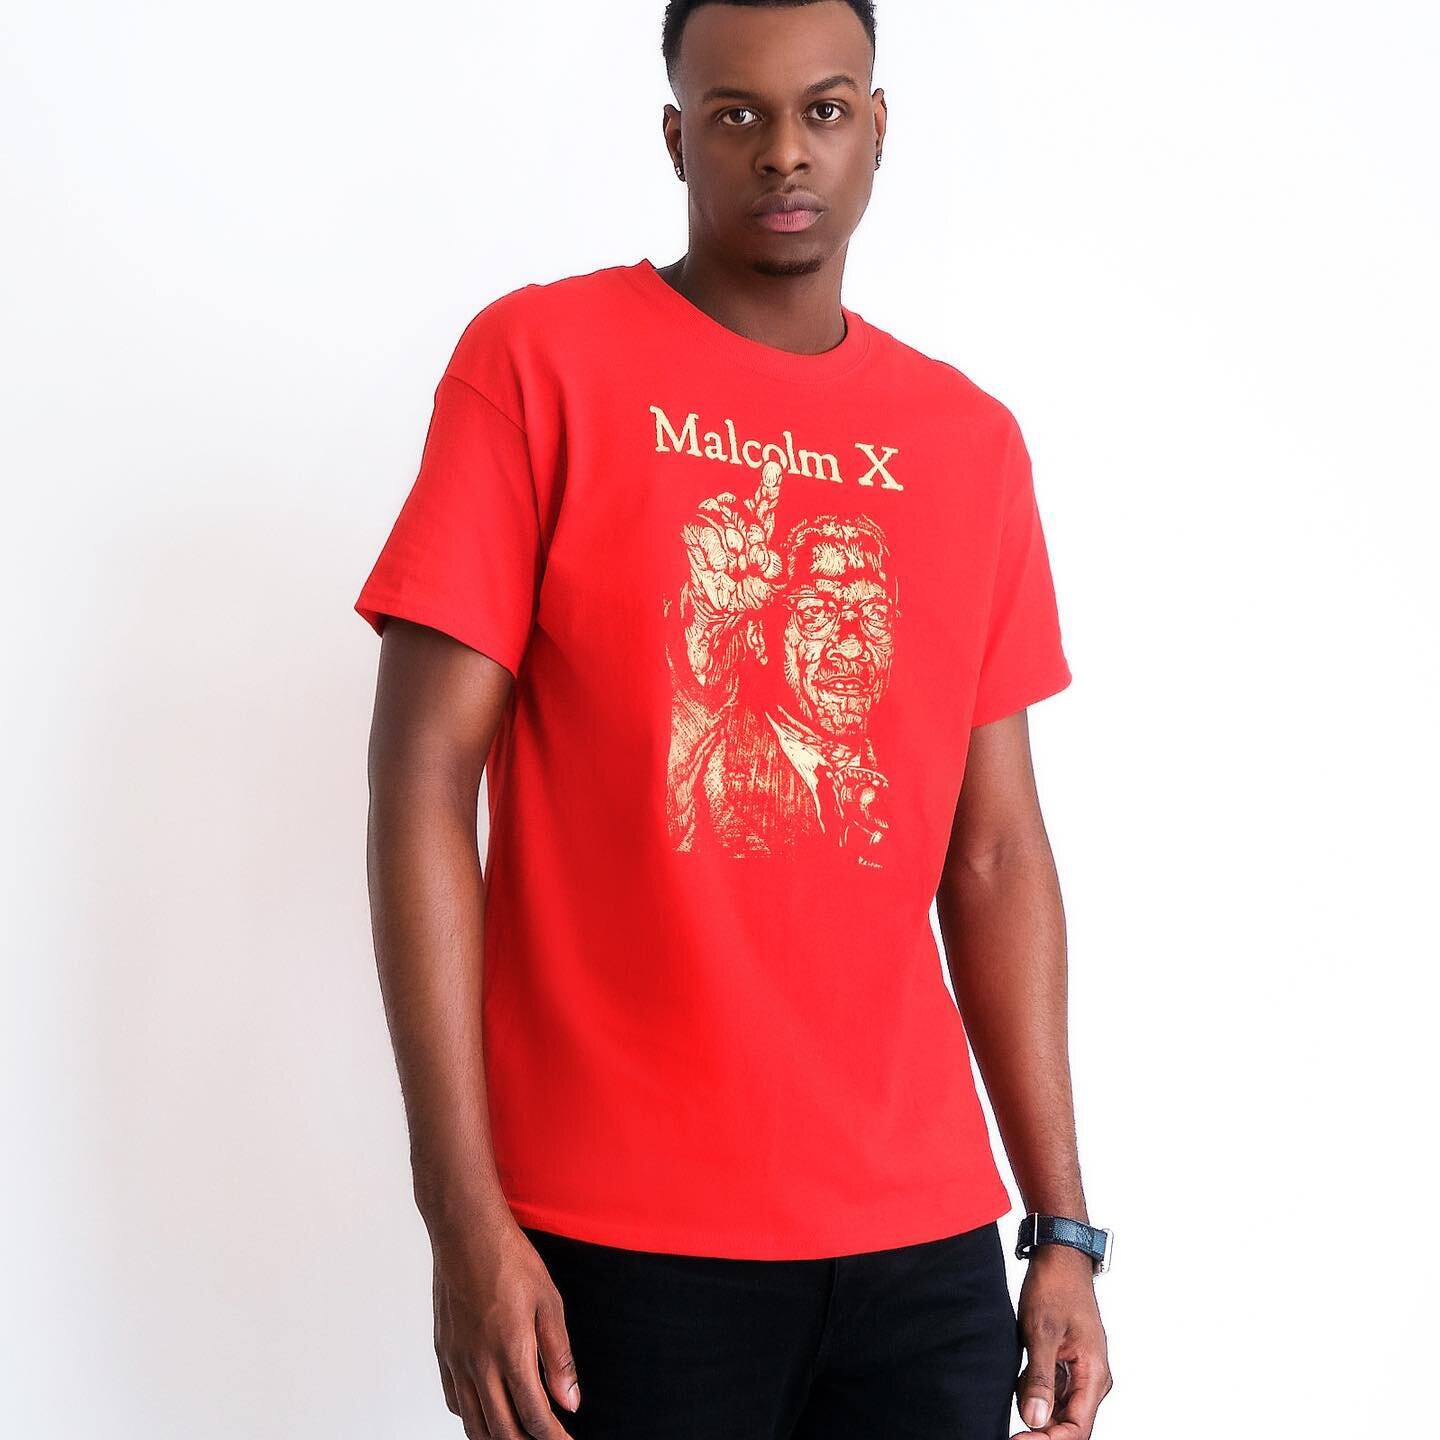 The legend of &ldquo;Malcolm X&rdquo; lives on as a part of Ethnicitees &ldquo;Cultural Wearables &ldquo; apparel brand! Pioneering biographical heritage apparel designed to feature linocut Black historical faces screen printed on the front and their